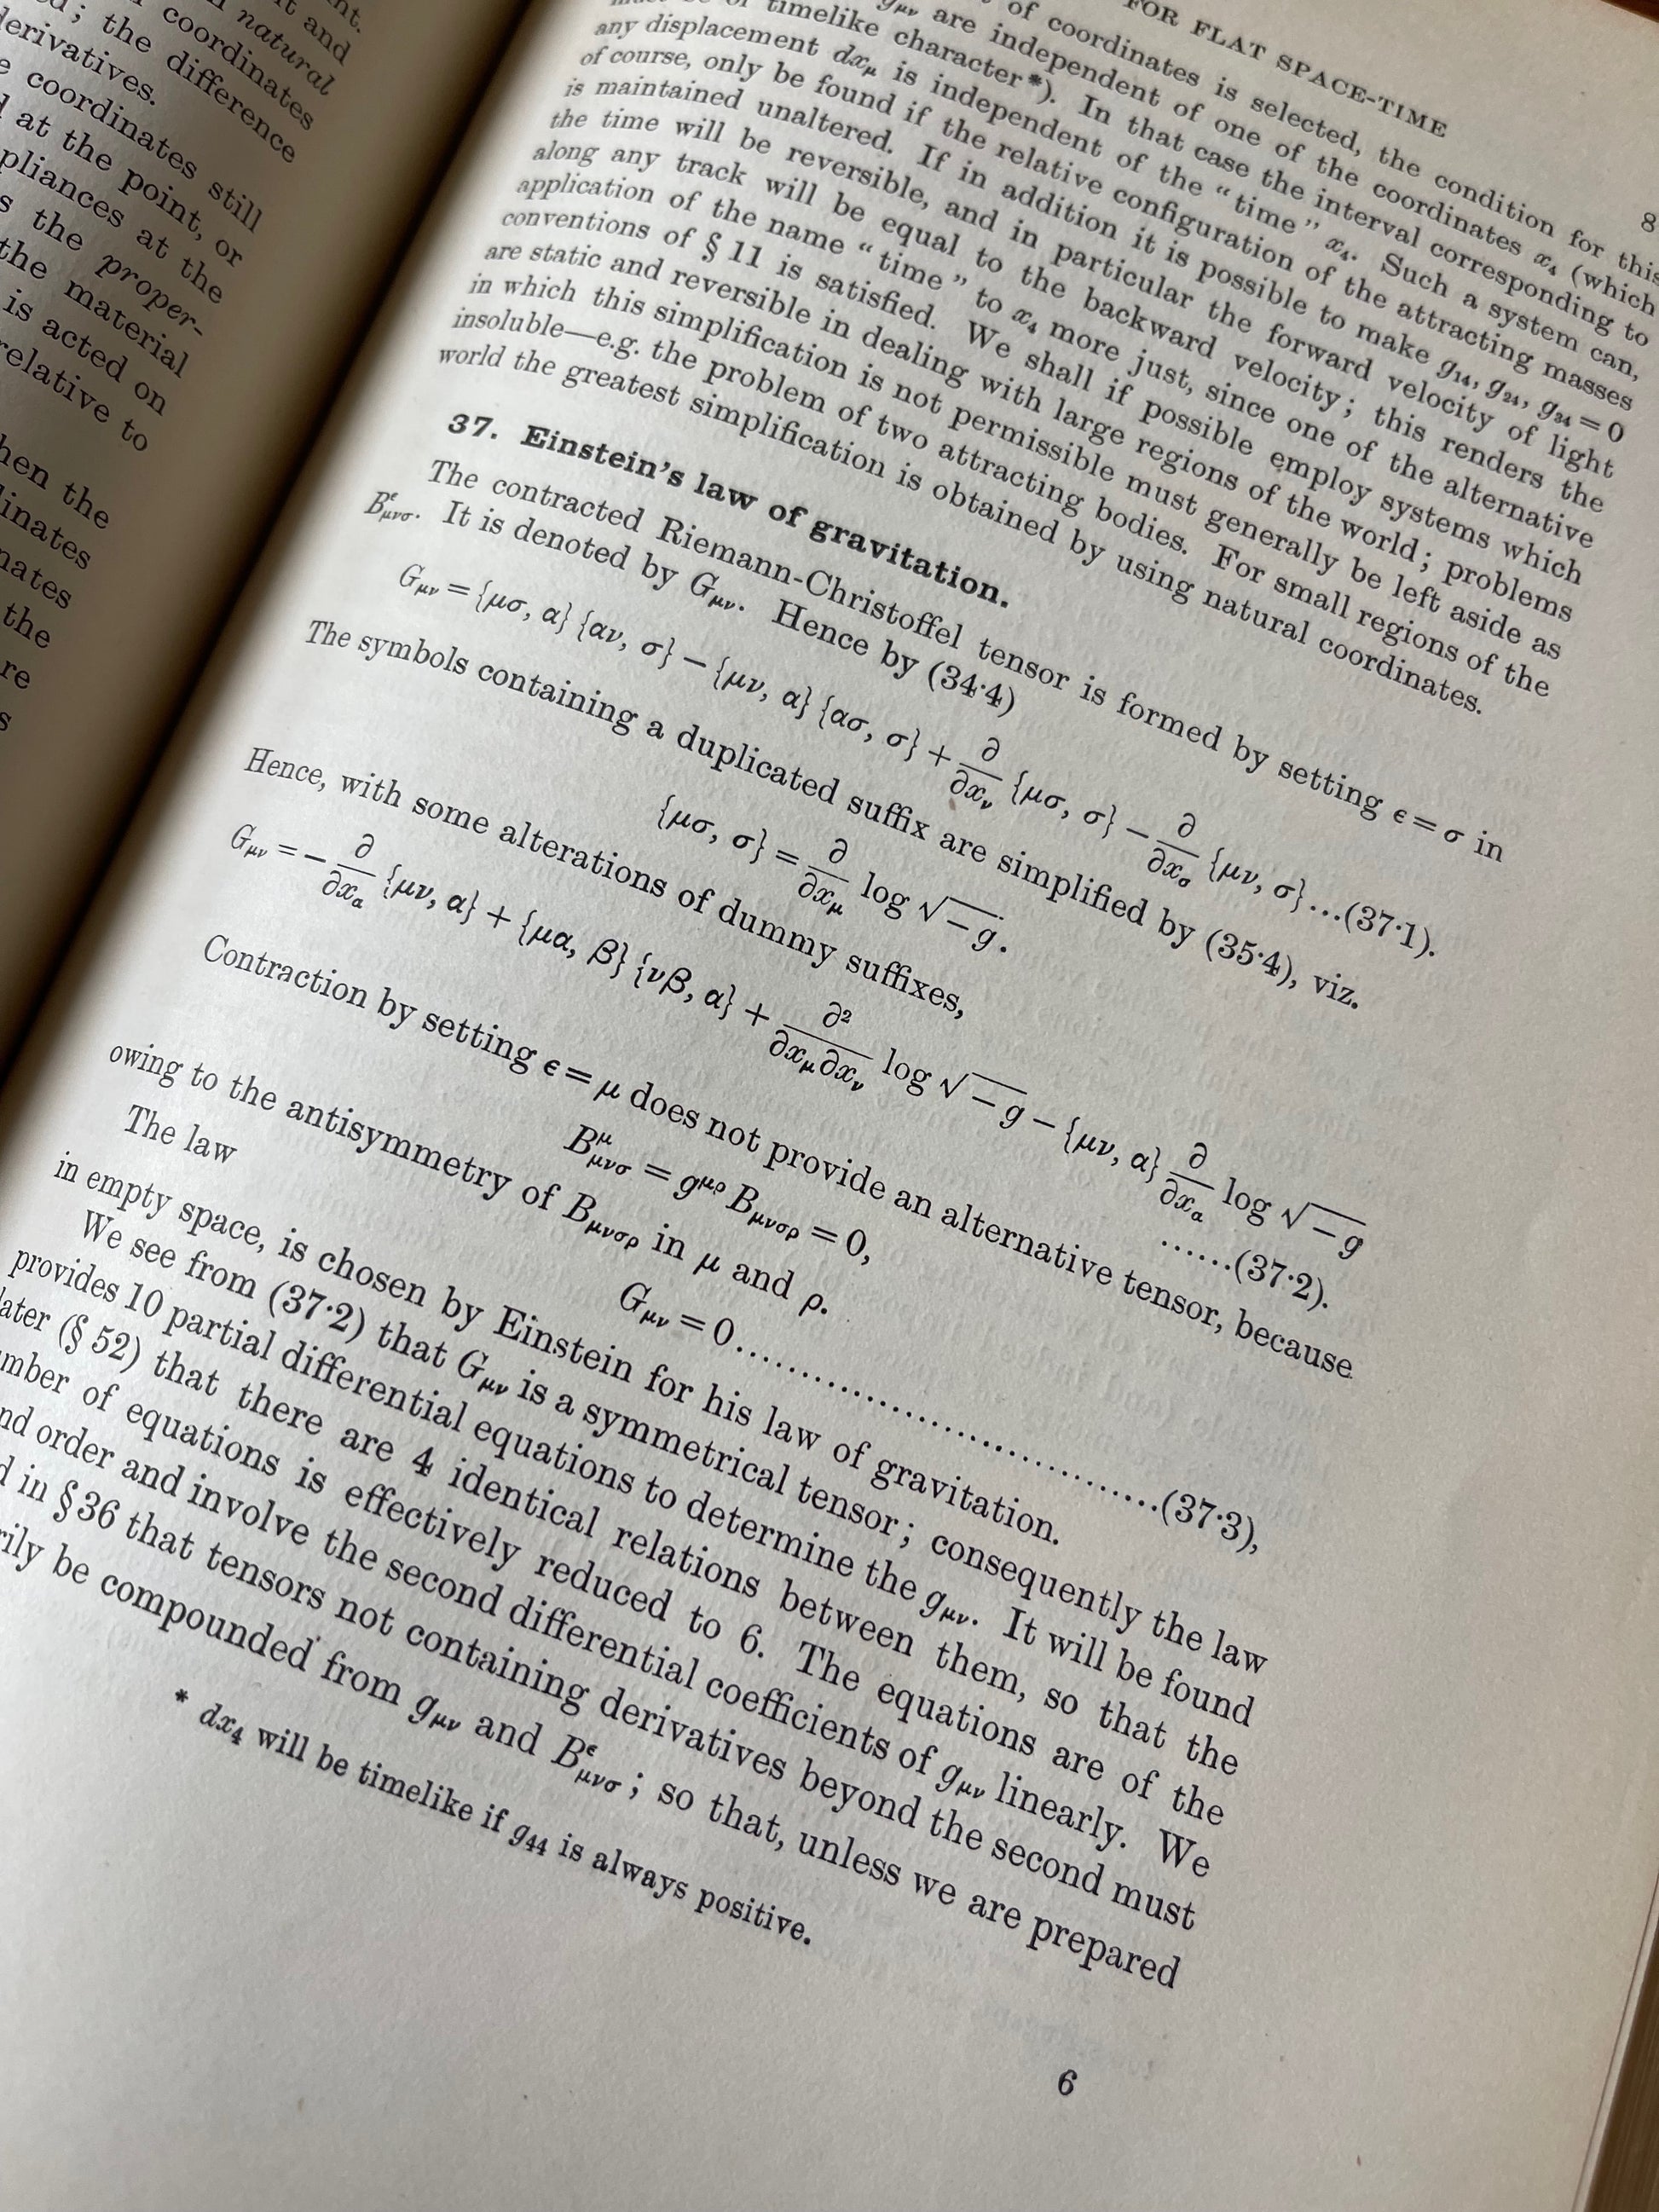 The Mathematical Theory of Relativity / 1937 - Precious Cache